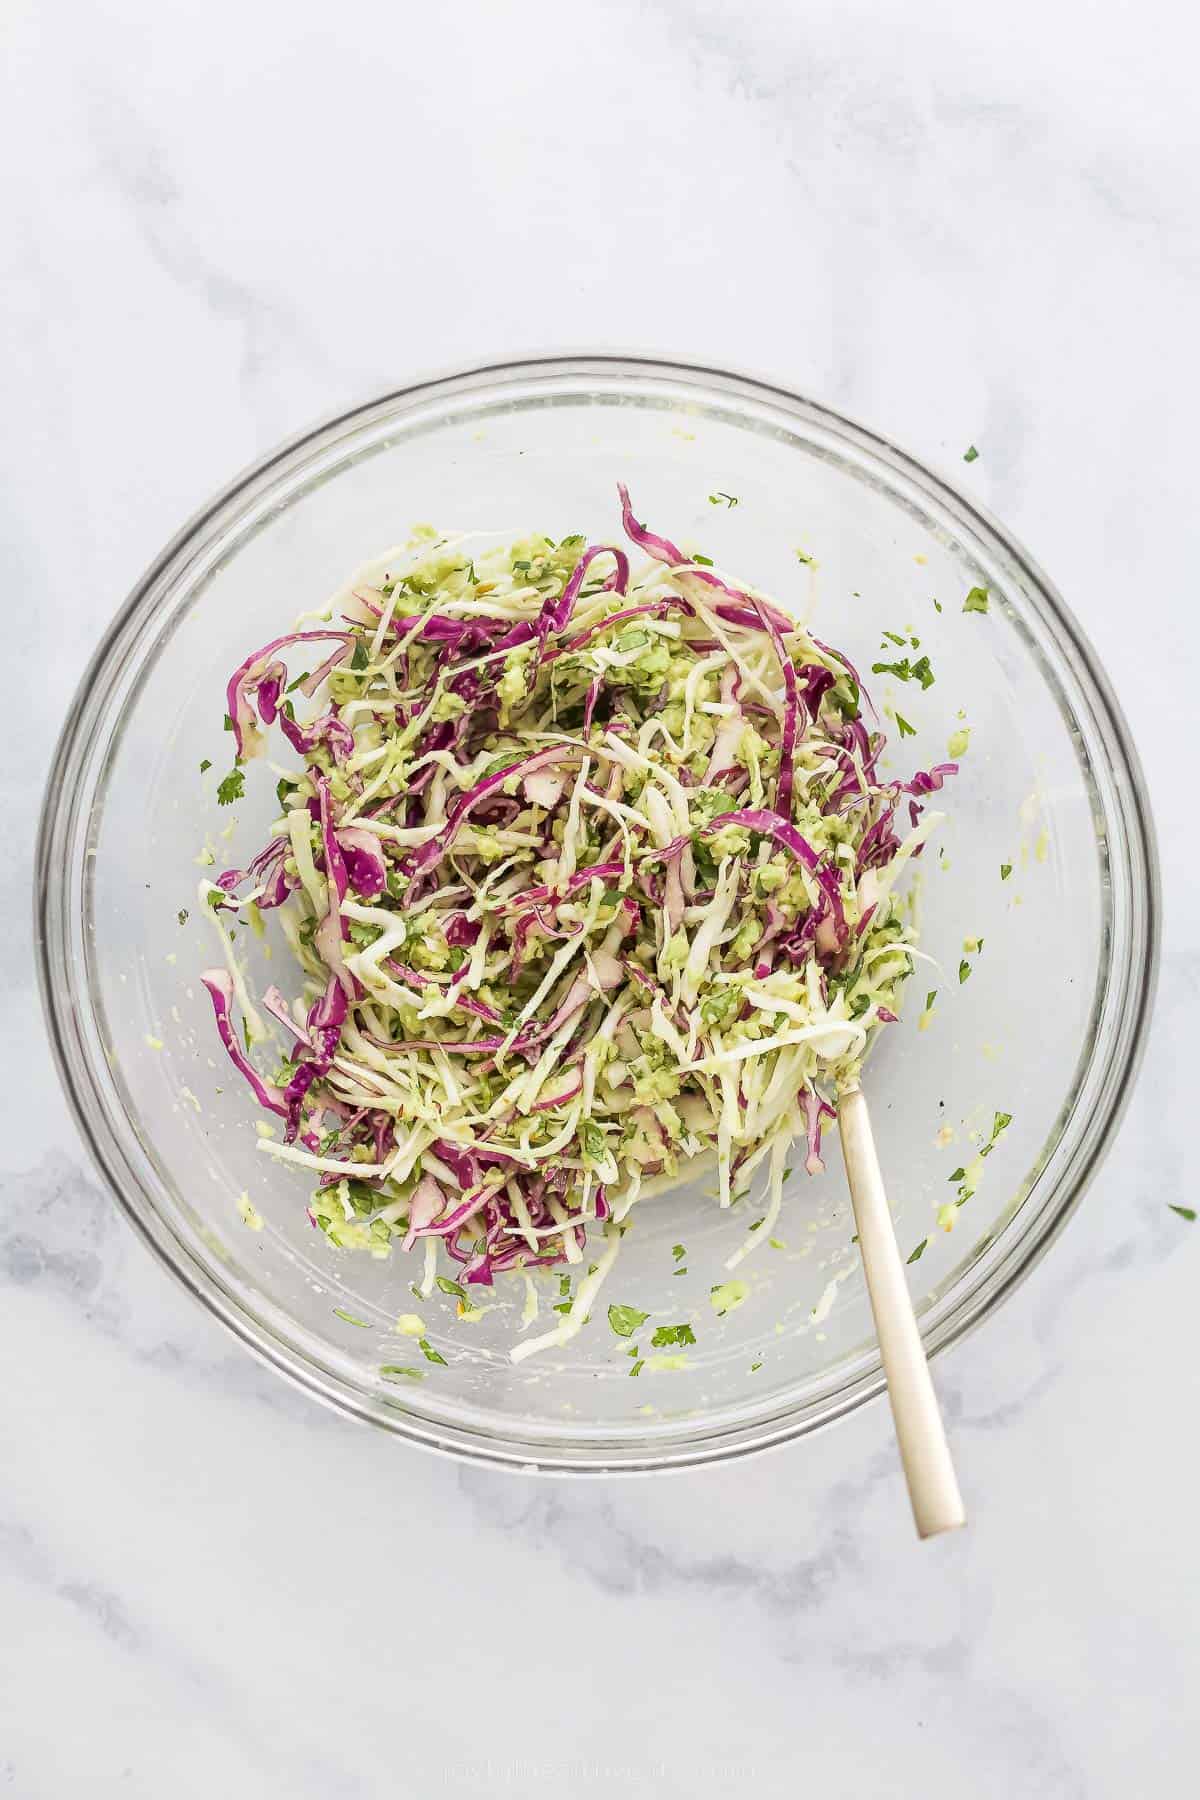 mixing shredded coleslaw in a bowl